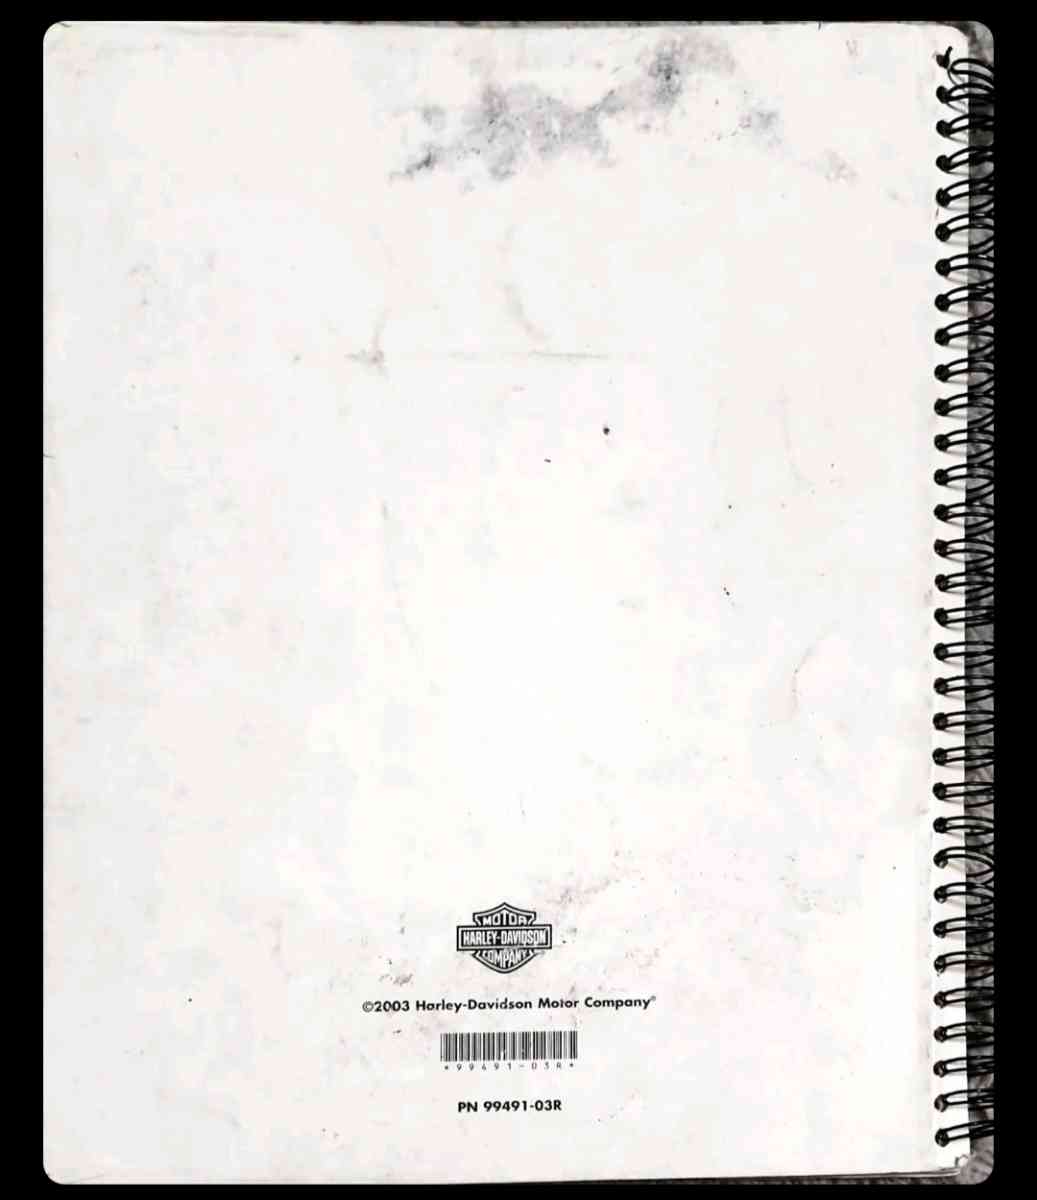 Service Manual for RX 750  Harley 1972 through 2003